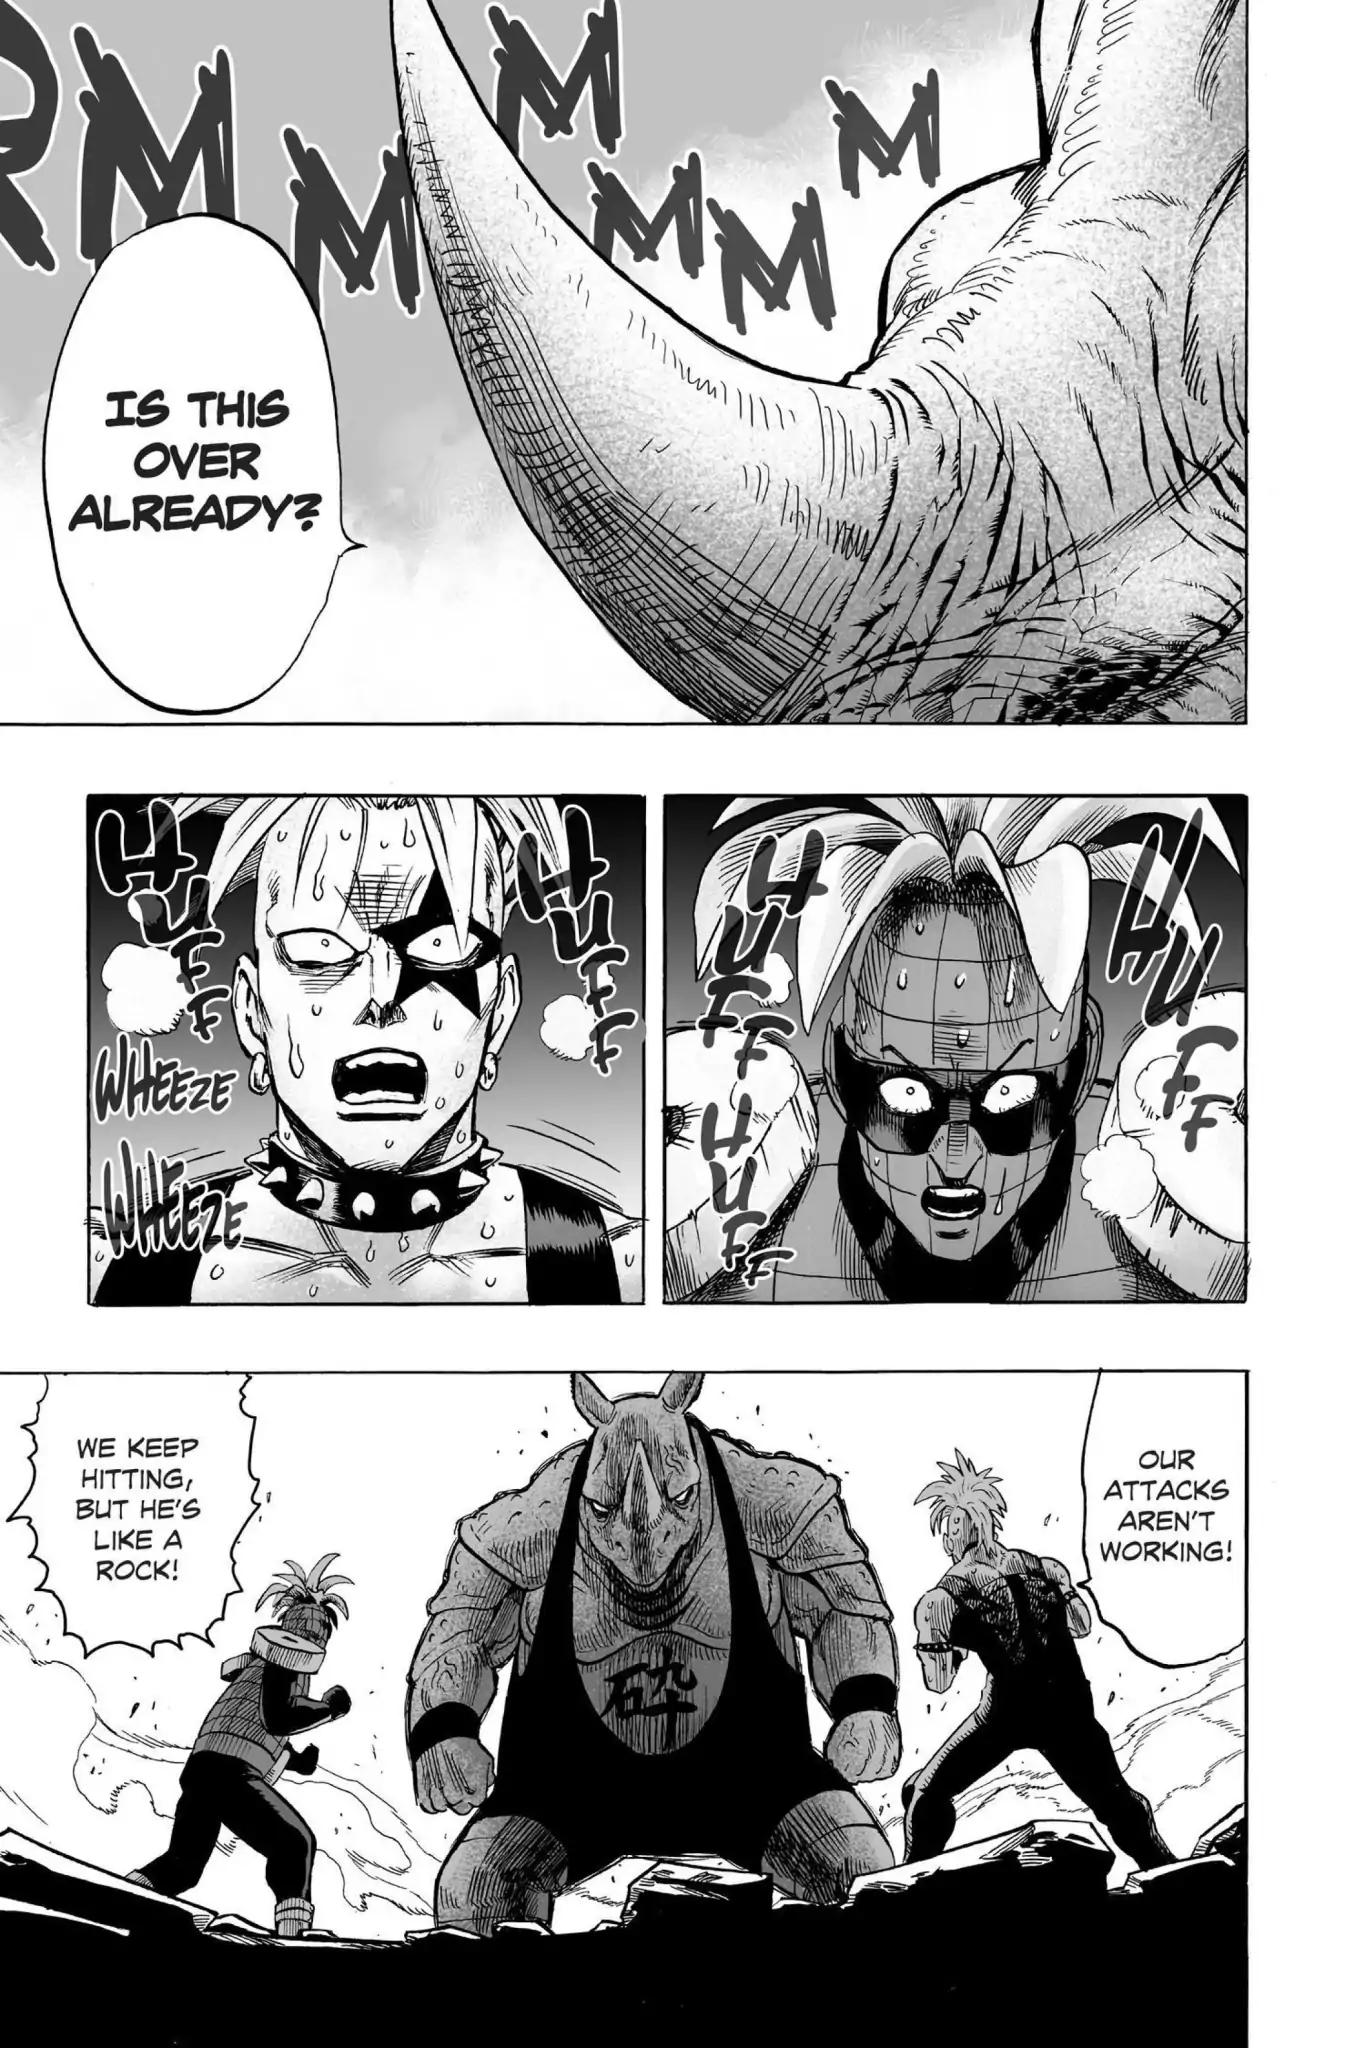 One-Punch Man chapter 59 page 11